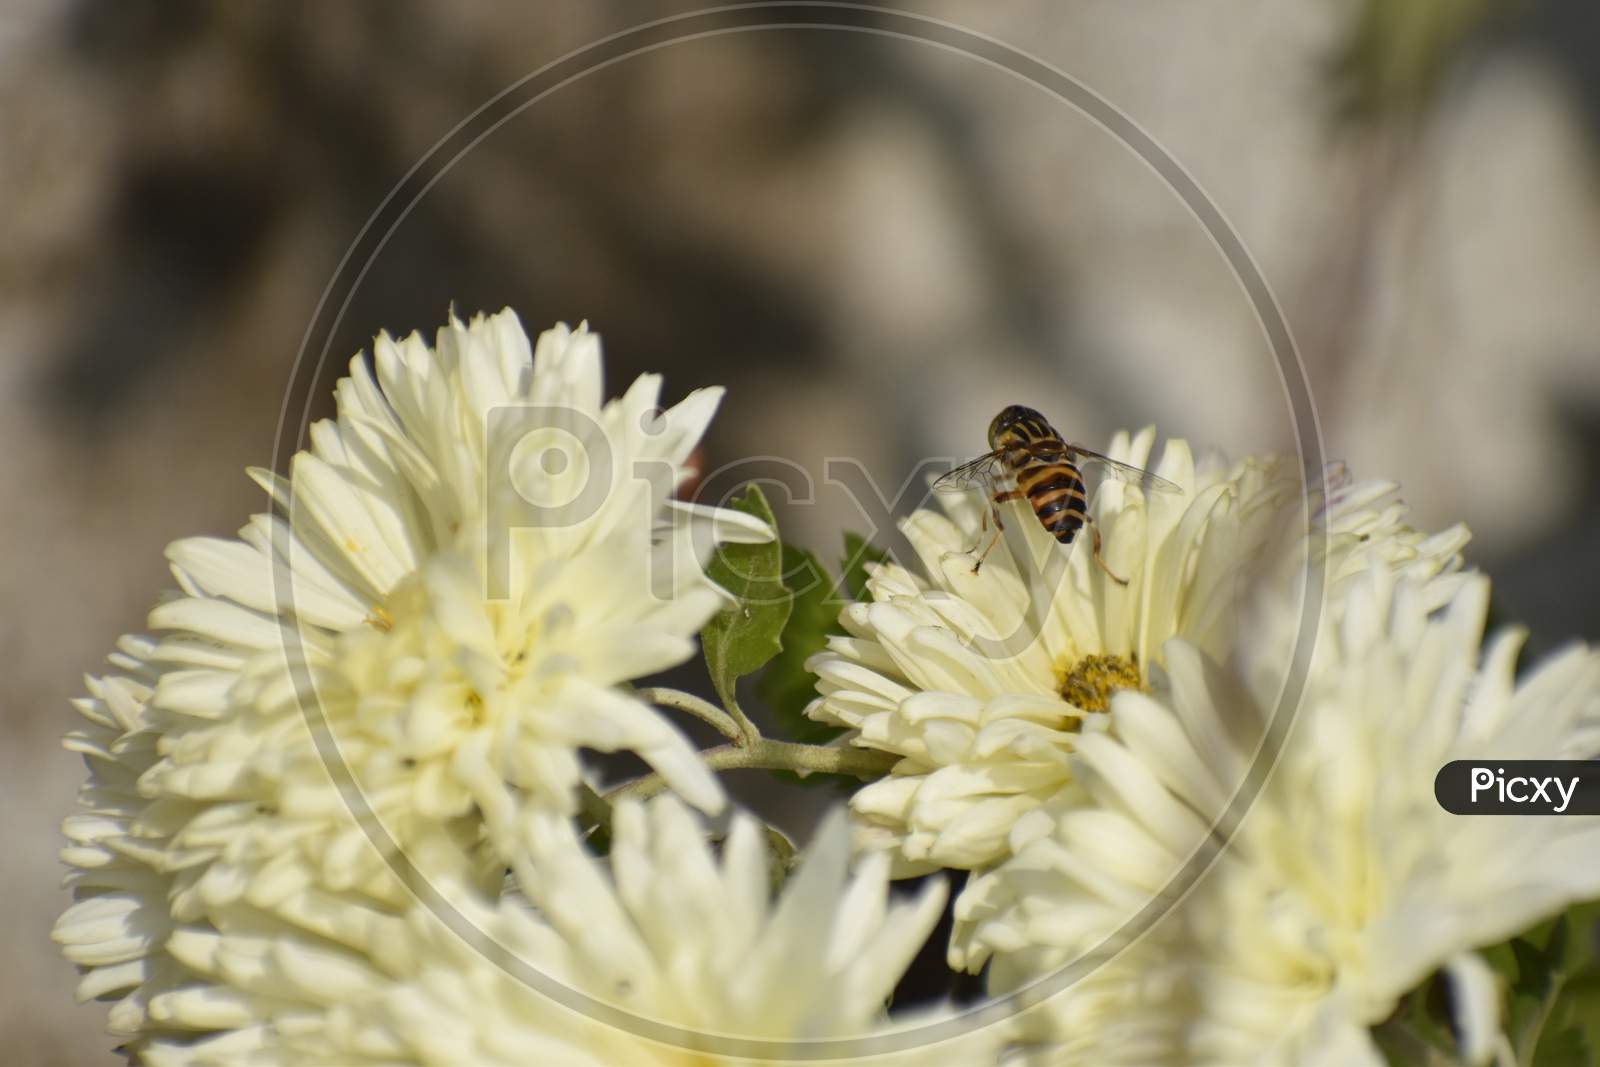 Beautiful Photograph Of Flowers With Honey Bee.